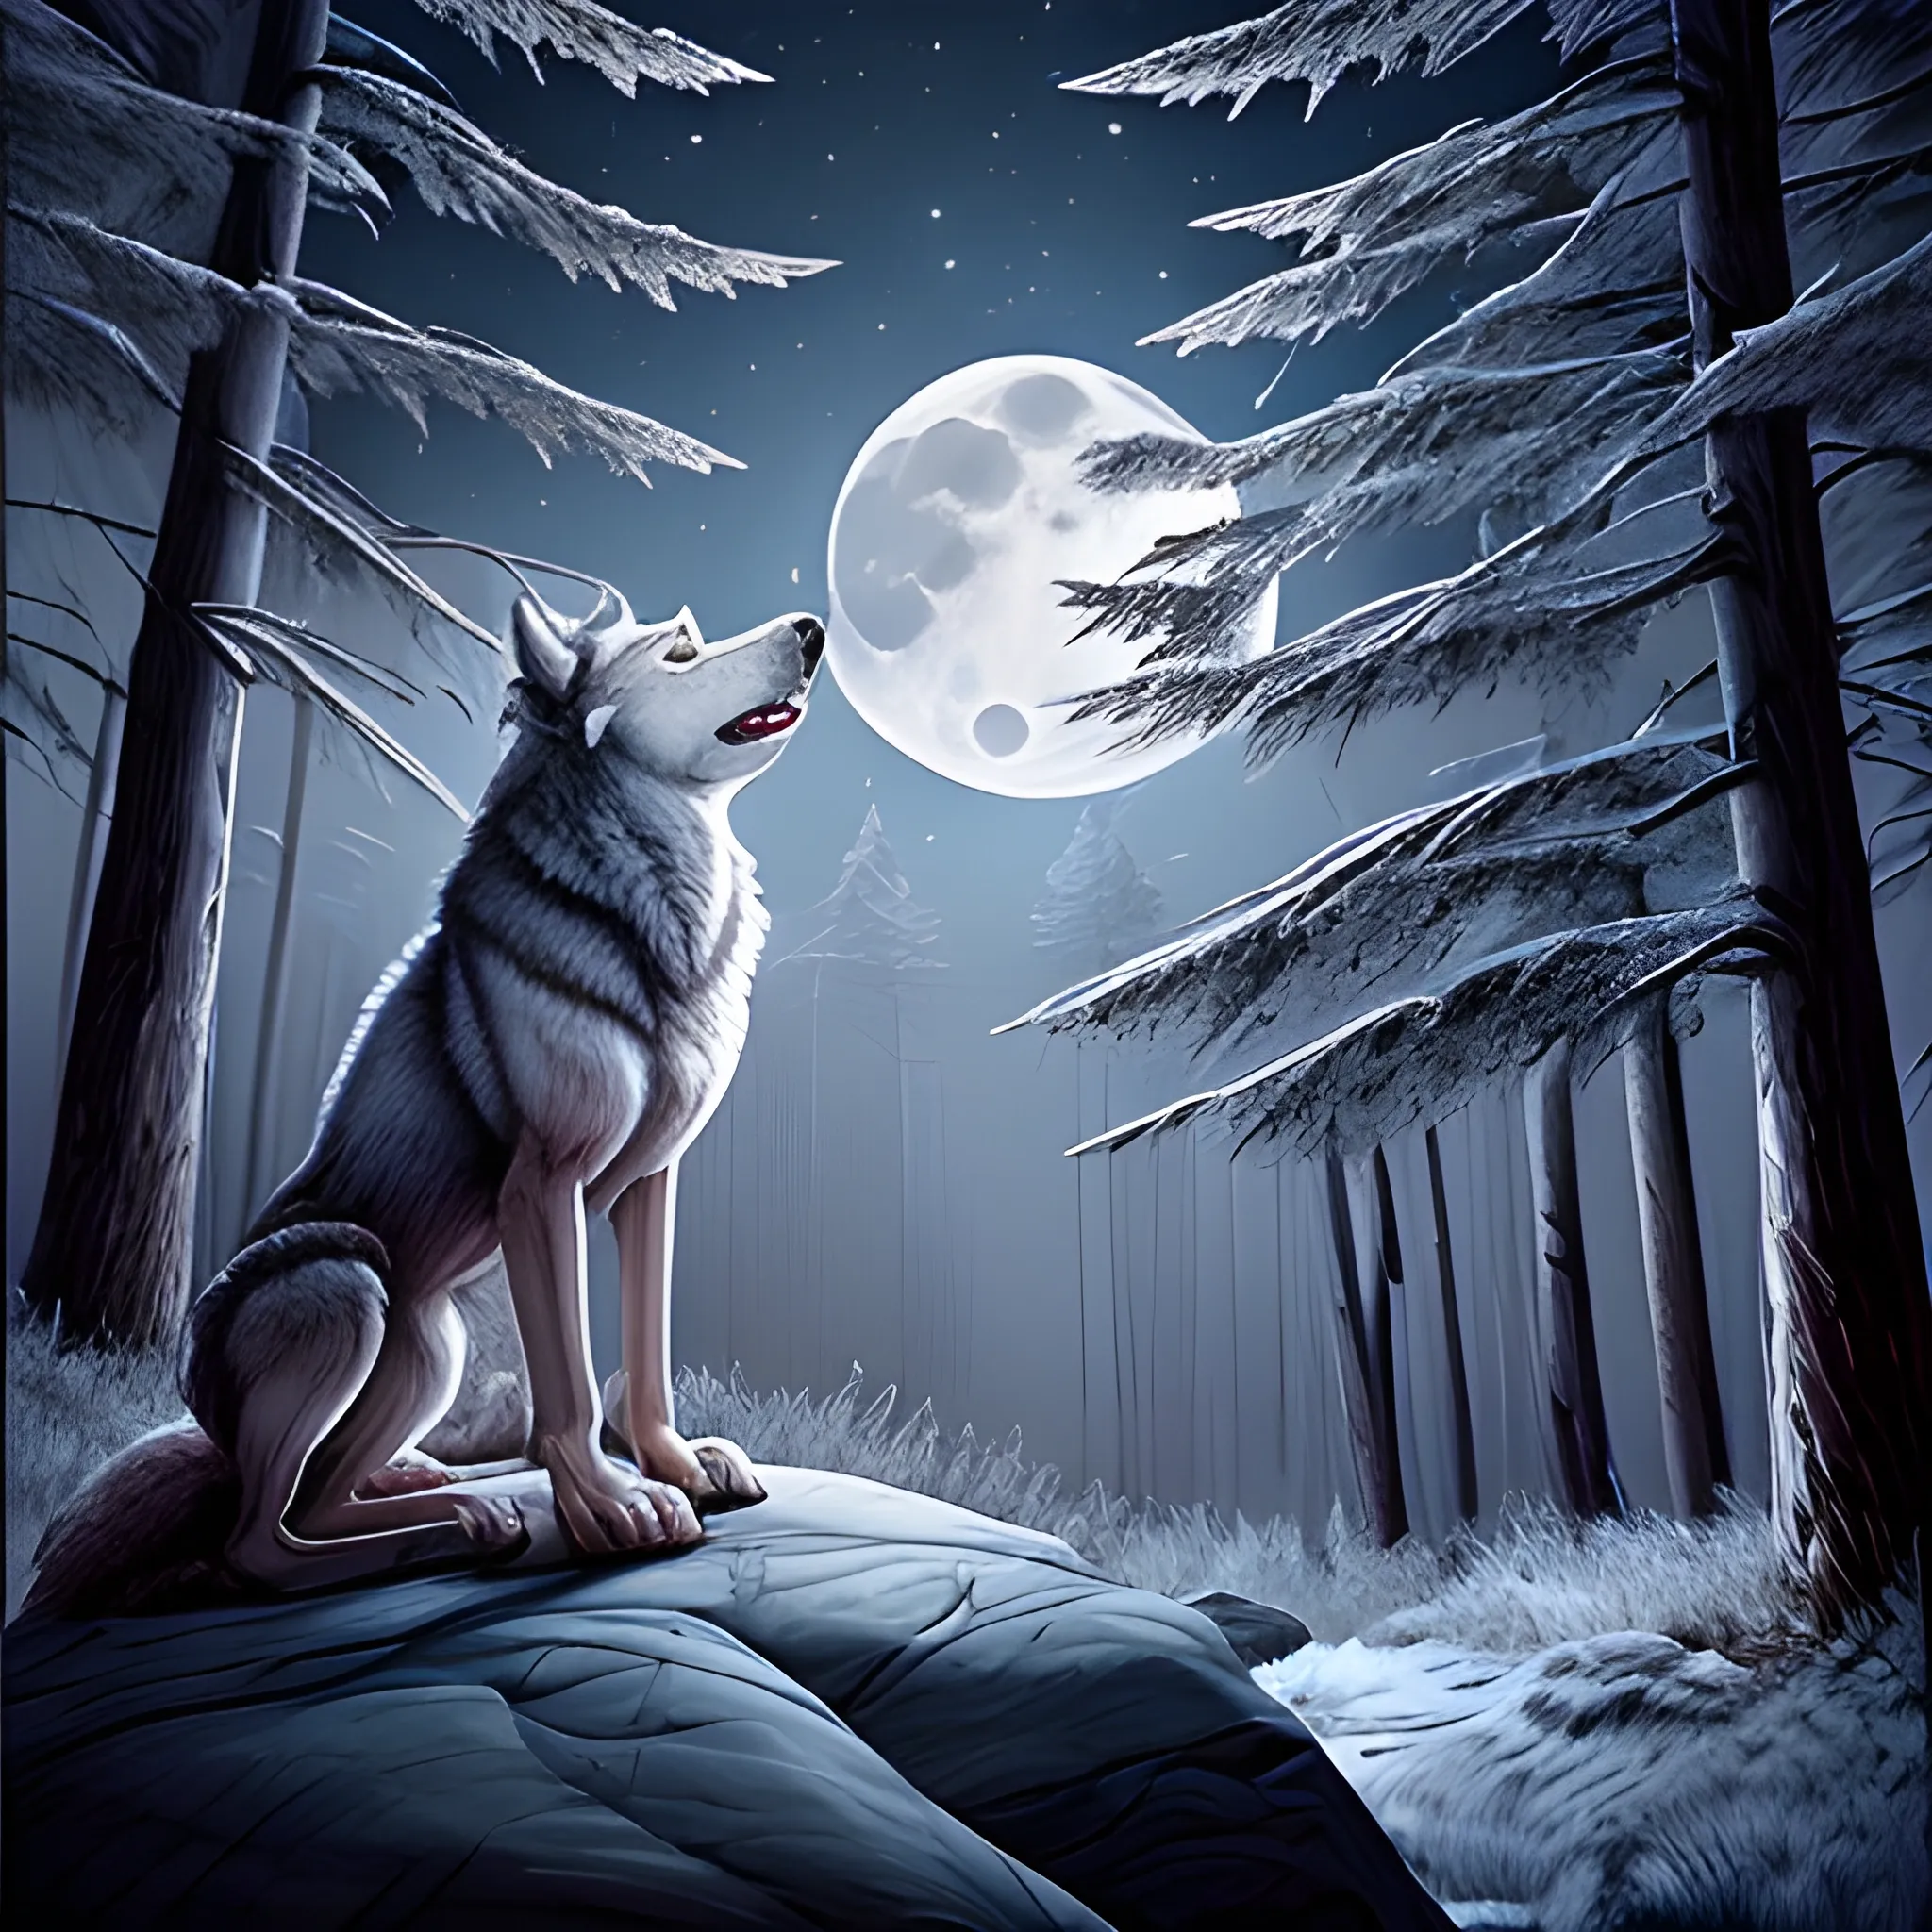 tmber wolf howling at fullmoon moonlight taiga forest edge stone ...